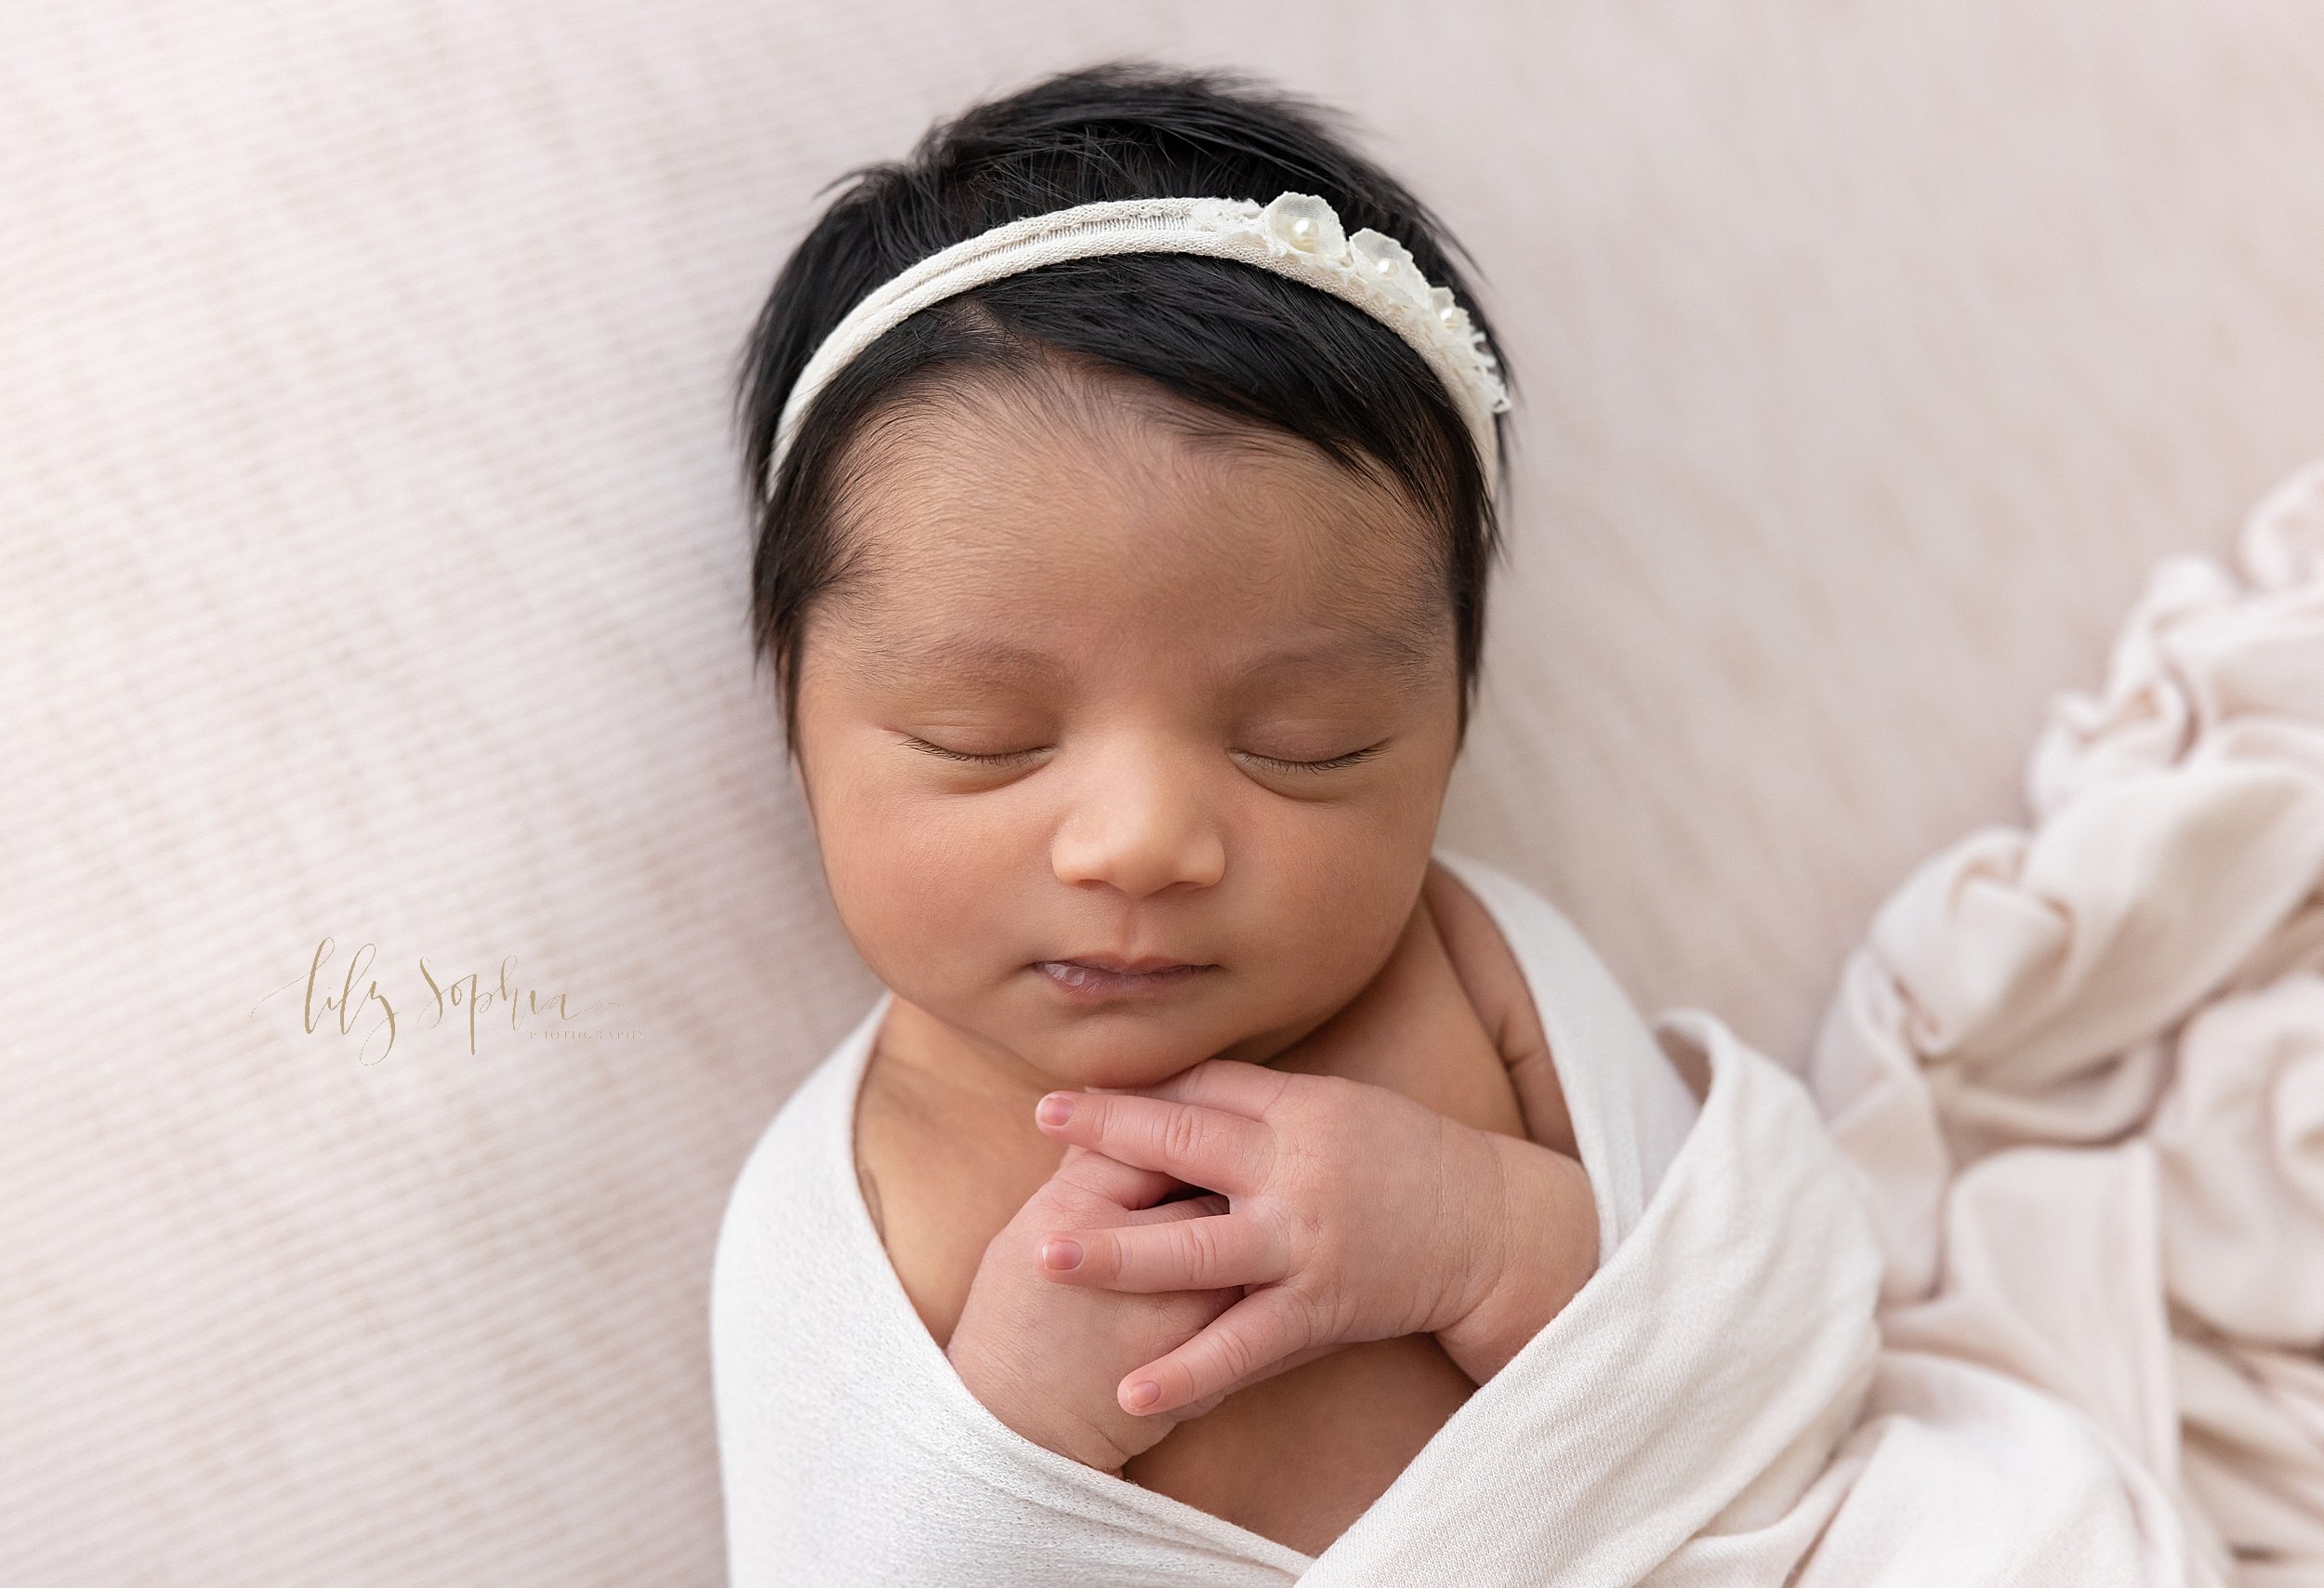  Newborn portrait of a sleeping Indian newborn baby girl as she is draped in a soft stretchy blanket, wearing a delicate headband in her jet black hair and holding her hands together on her chest taken near Midtown in Atlanta in natural light at a ph